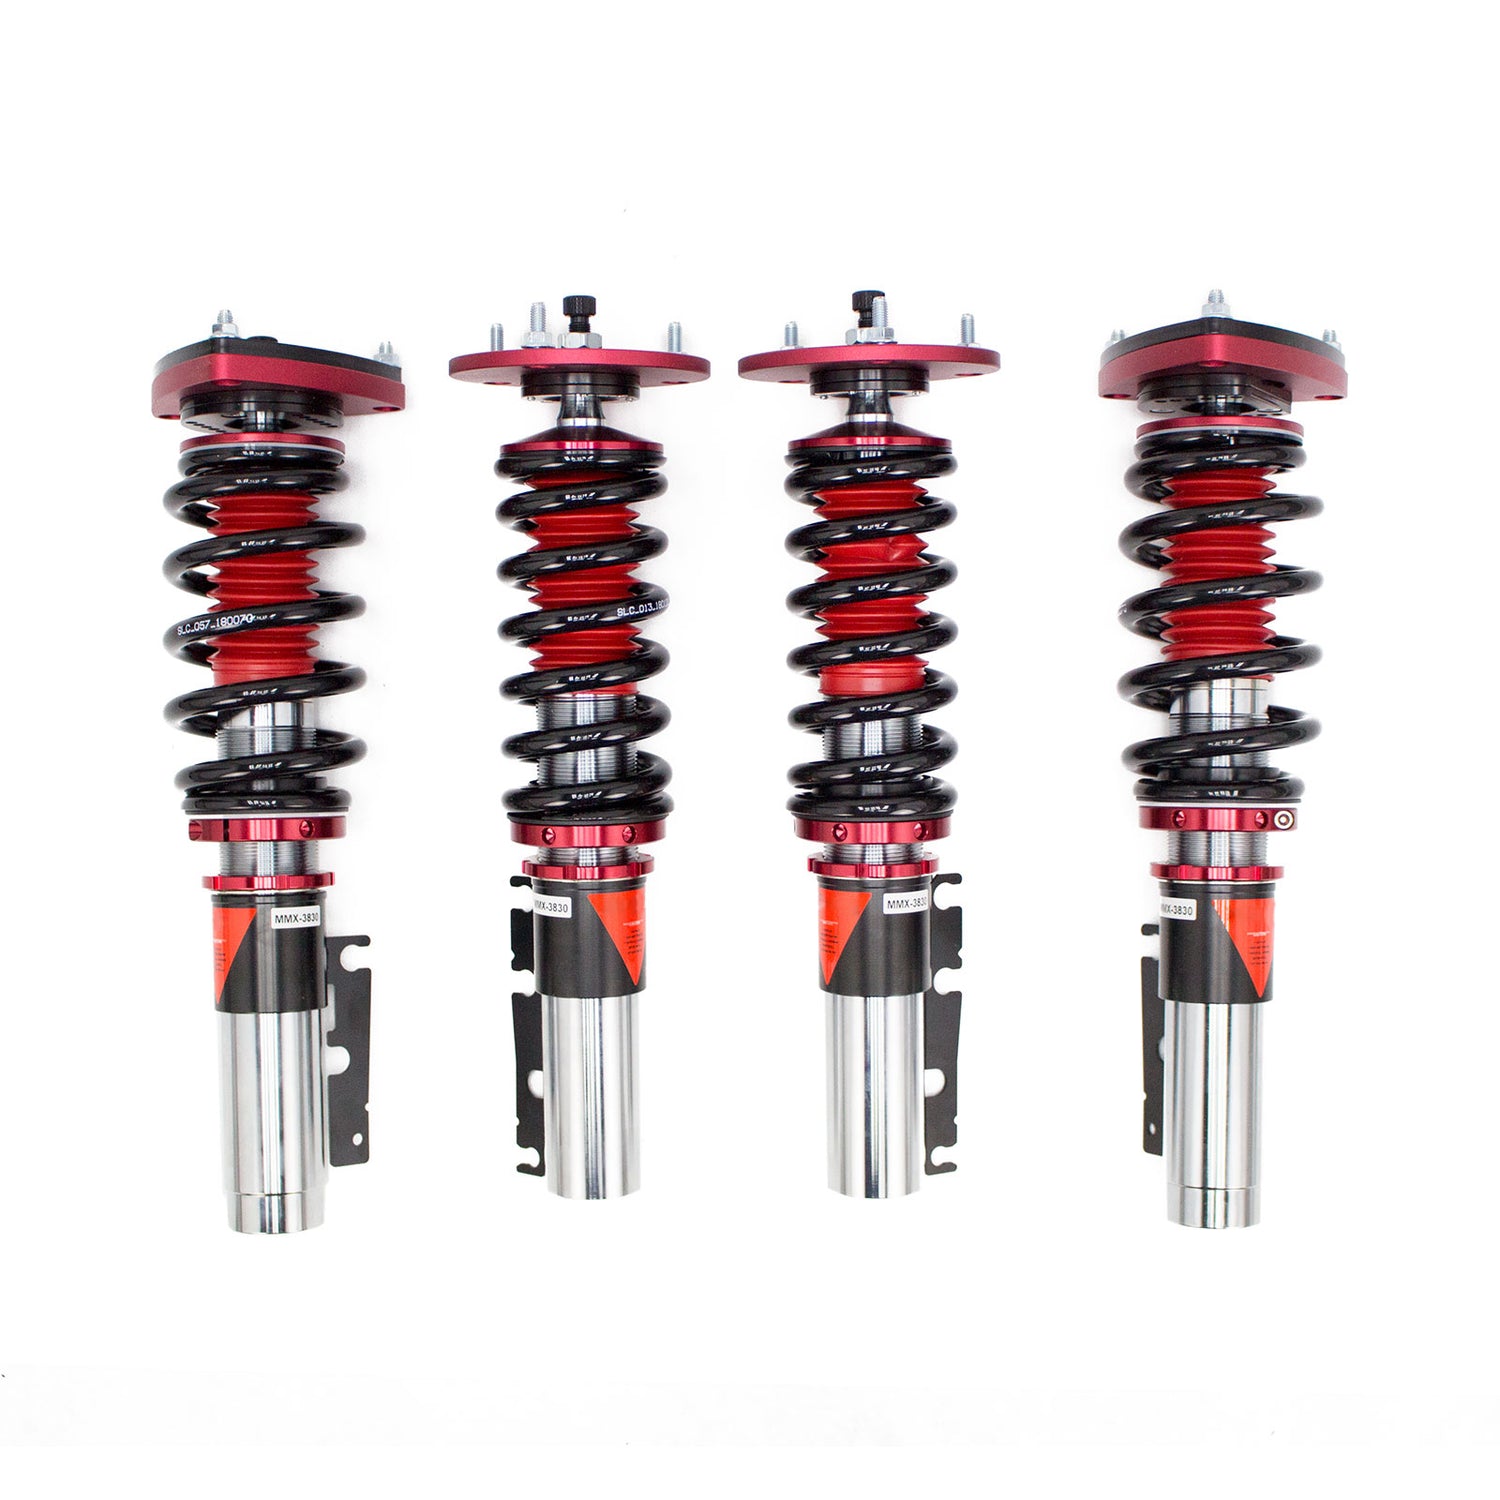 MMX3830 MAXX Coilovers Lowering Kit, Fully Adjustable, Ride Height, 40 Clicks Rebound Settings, Porsche Boxster Roadster(986) 1996-04